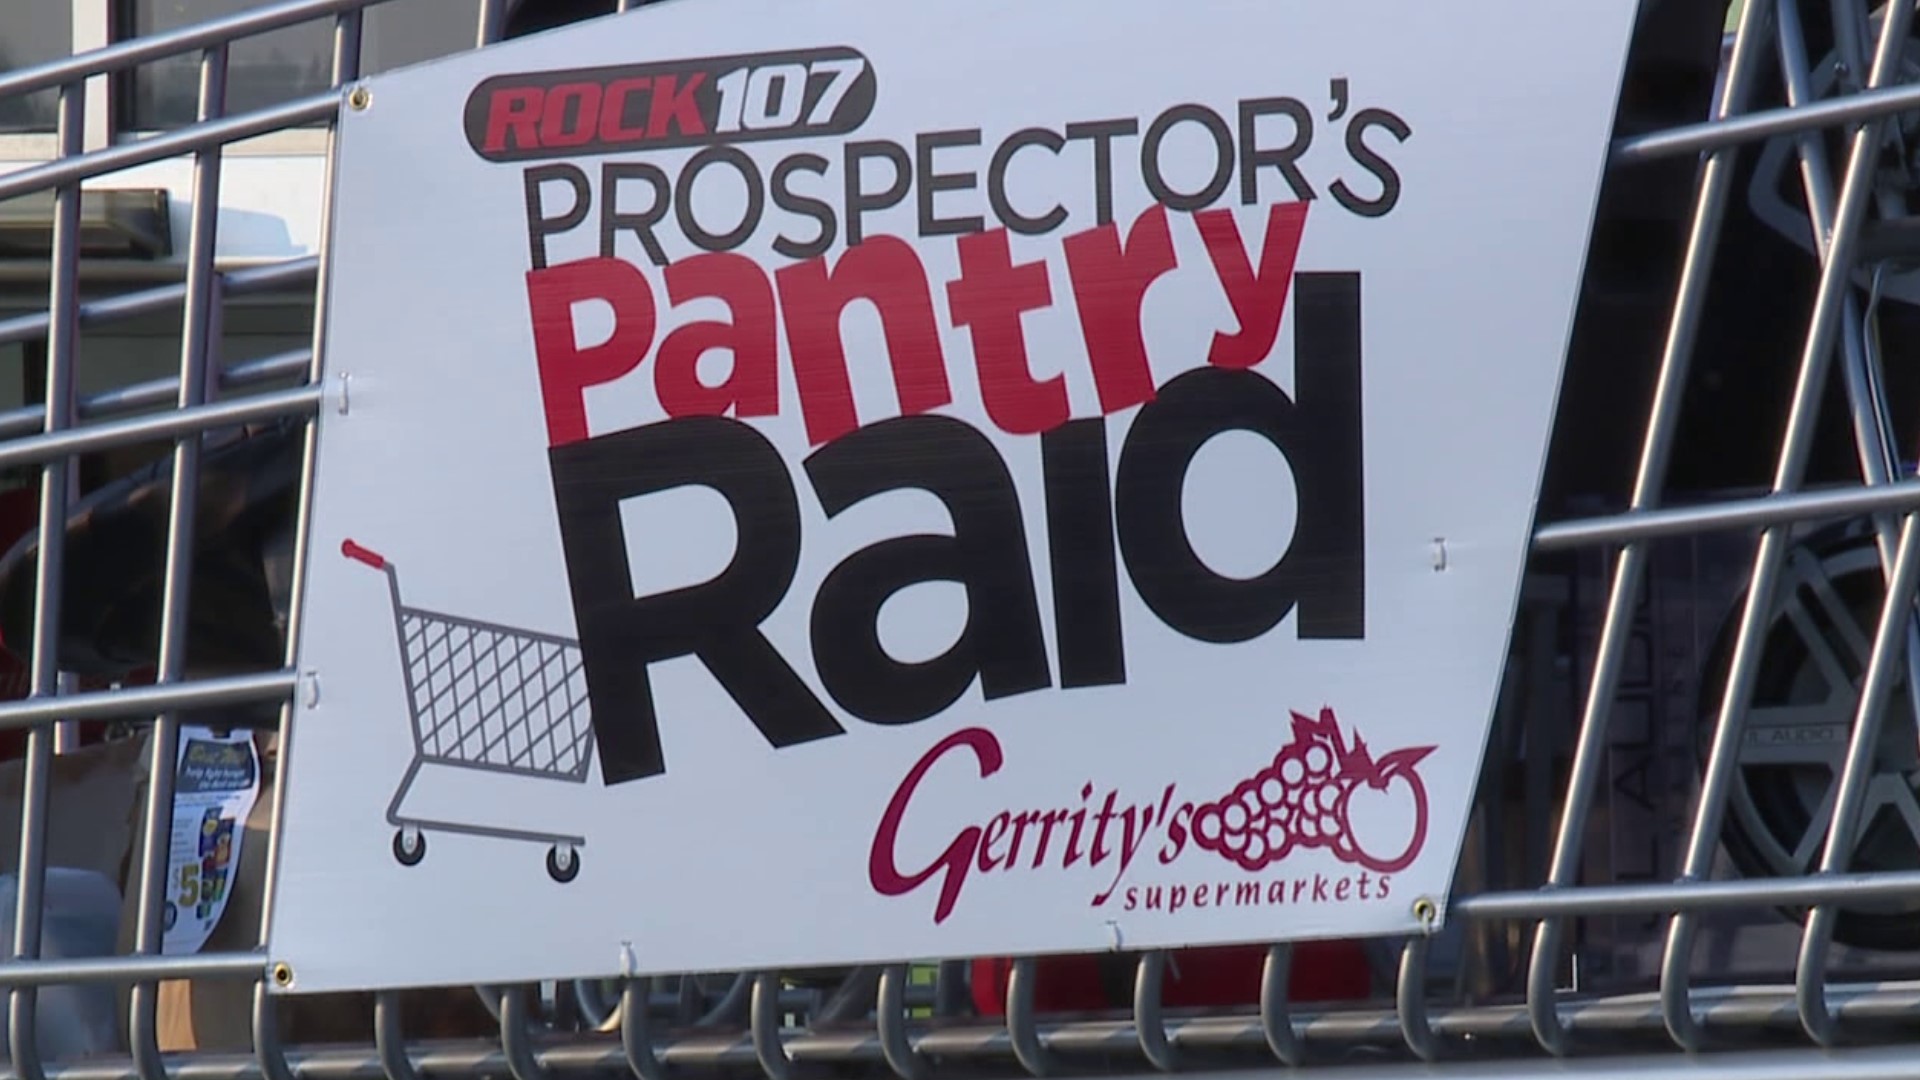 An annual food drive is back in our area, and this one is hard to miss. Rock 107's Prospector's 21st Pantry Raid kicked off Monday morning at Gerrity's in Moosic.